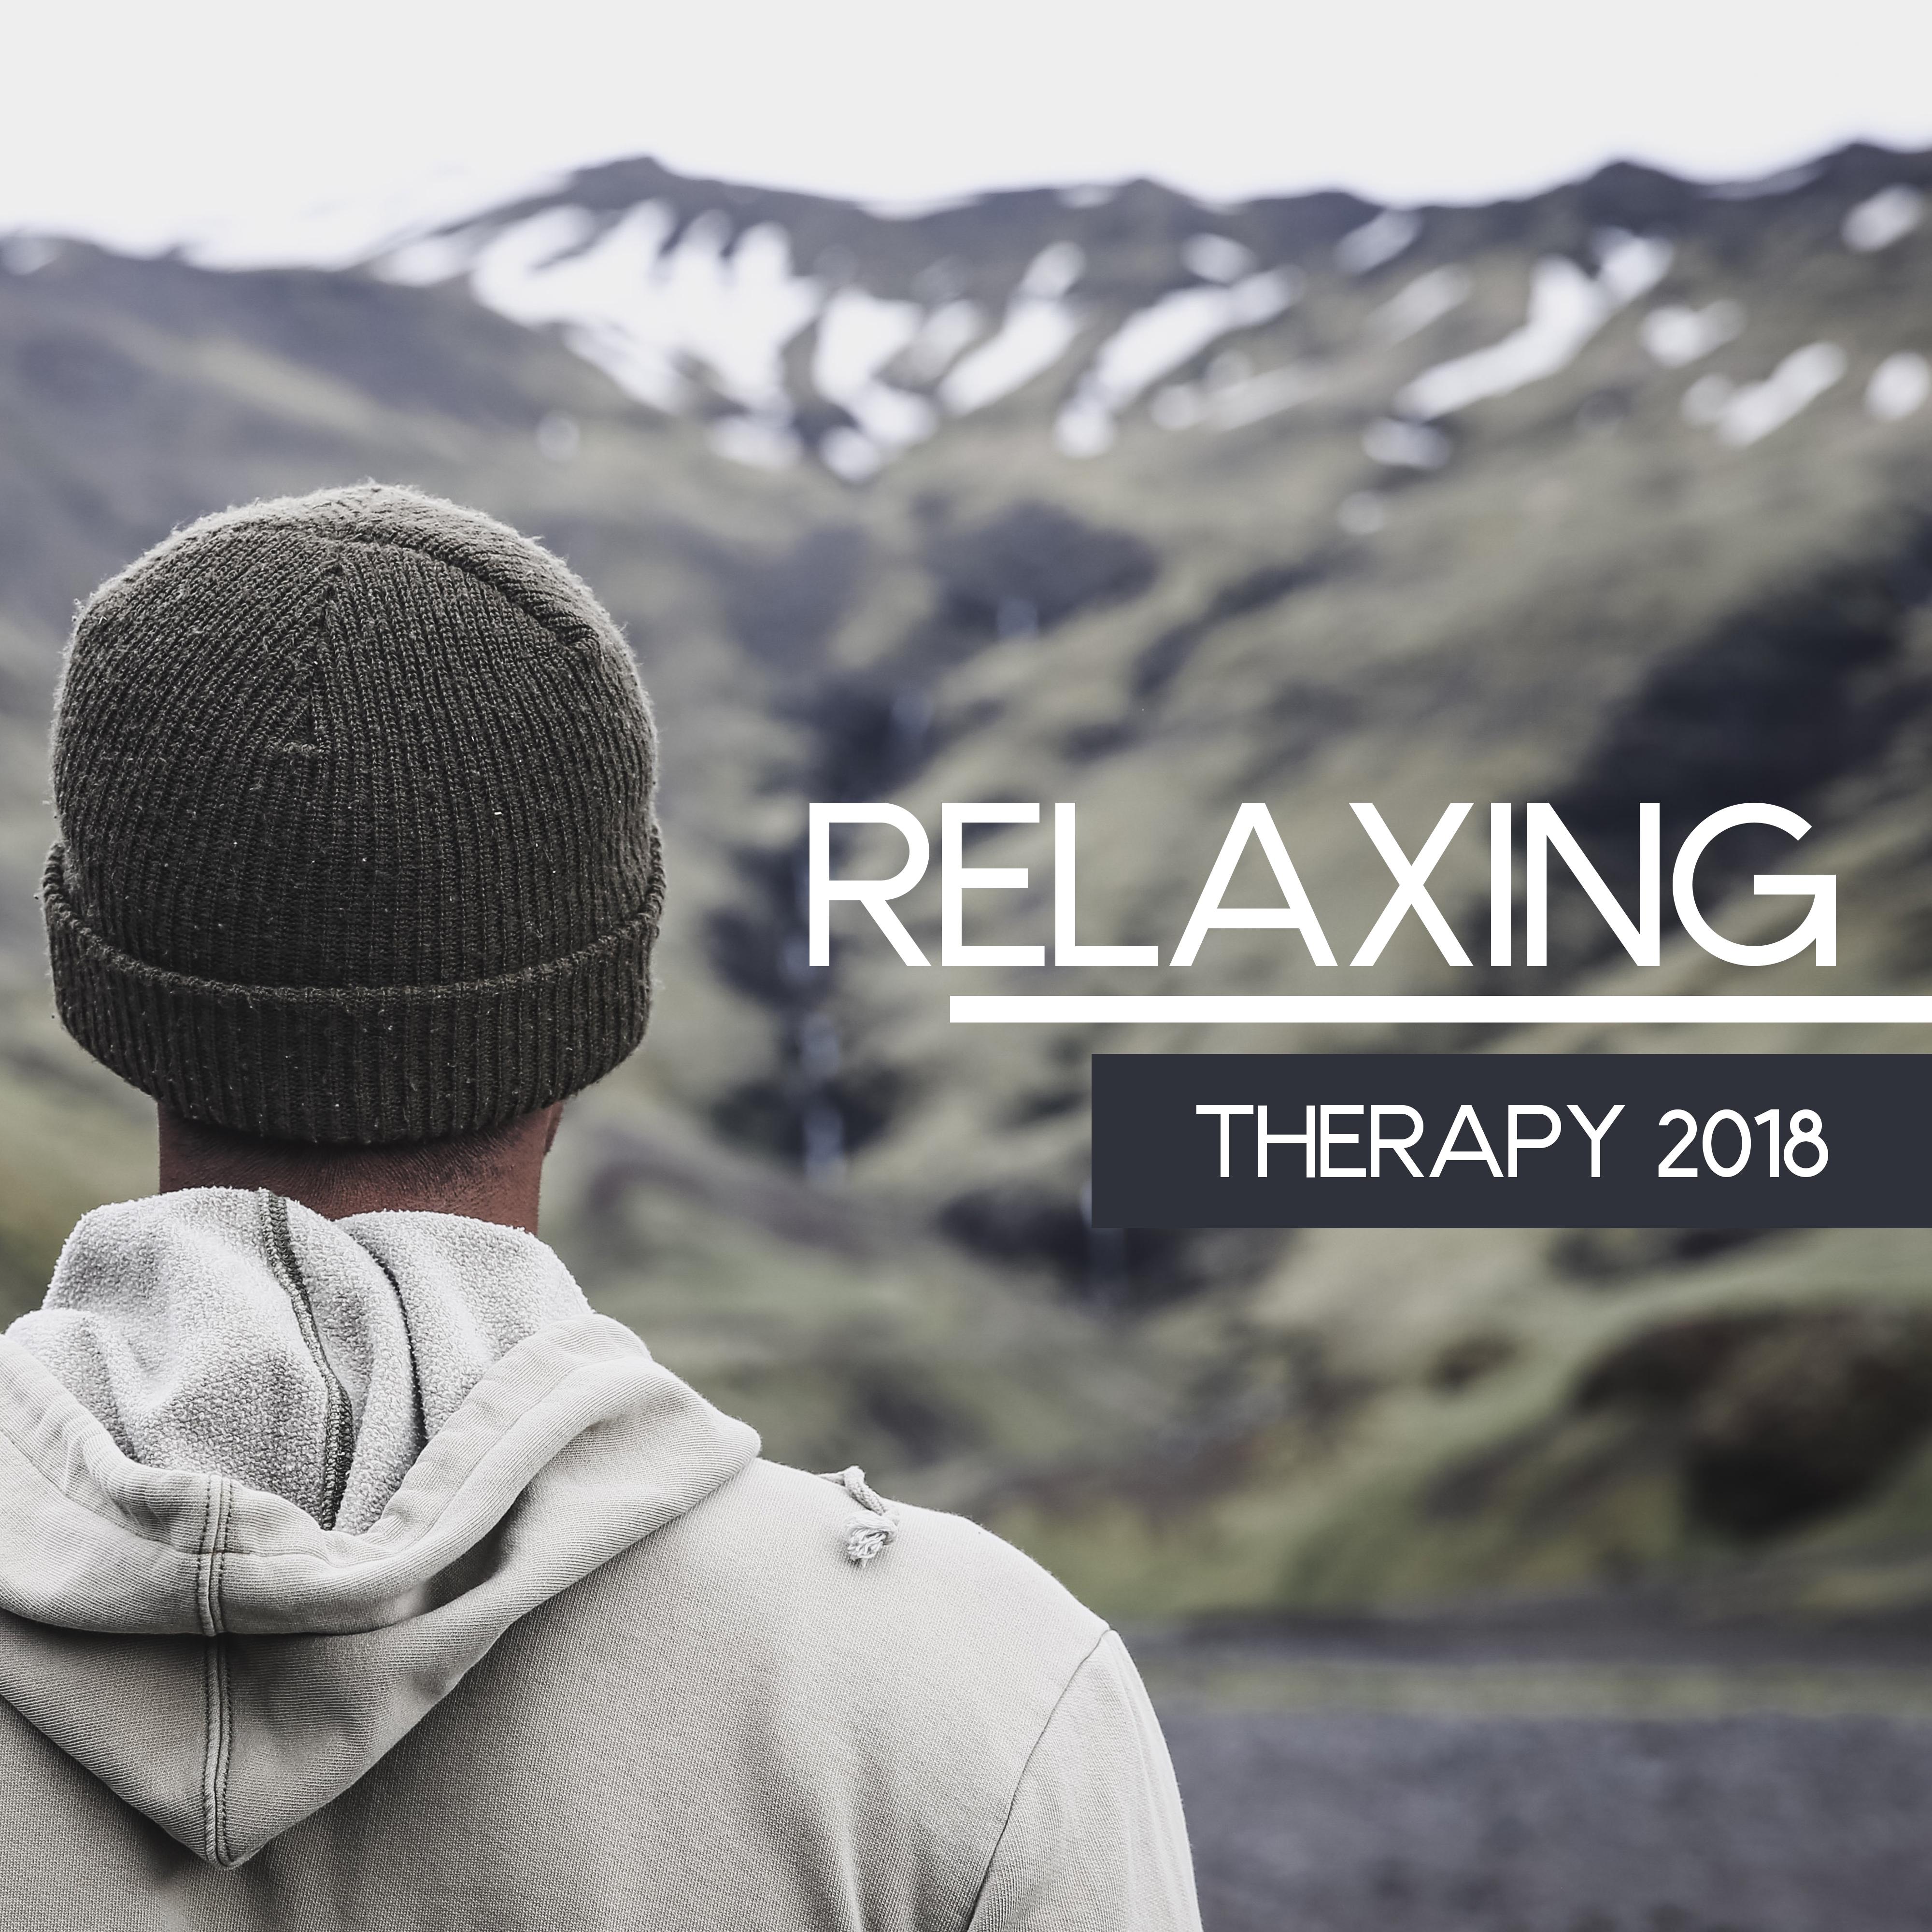 Relaxing Therapy 2018